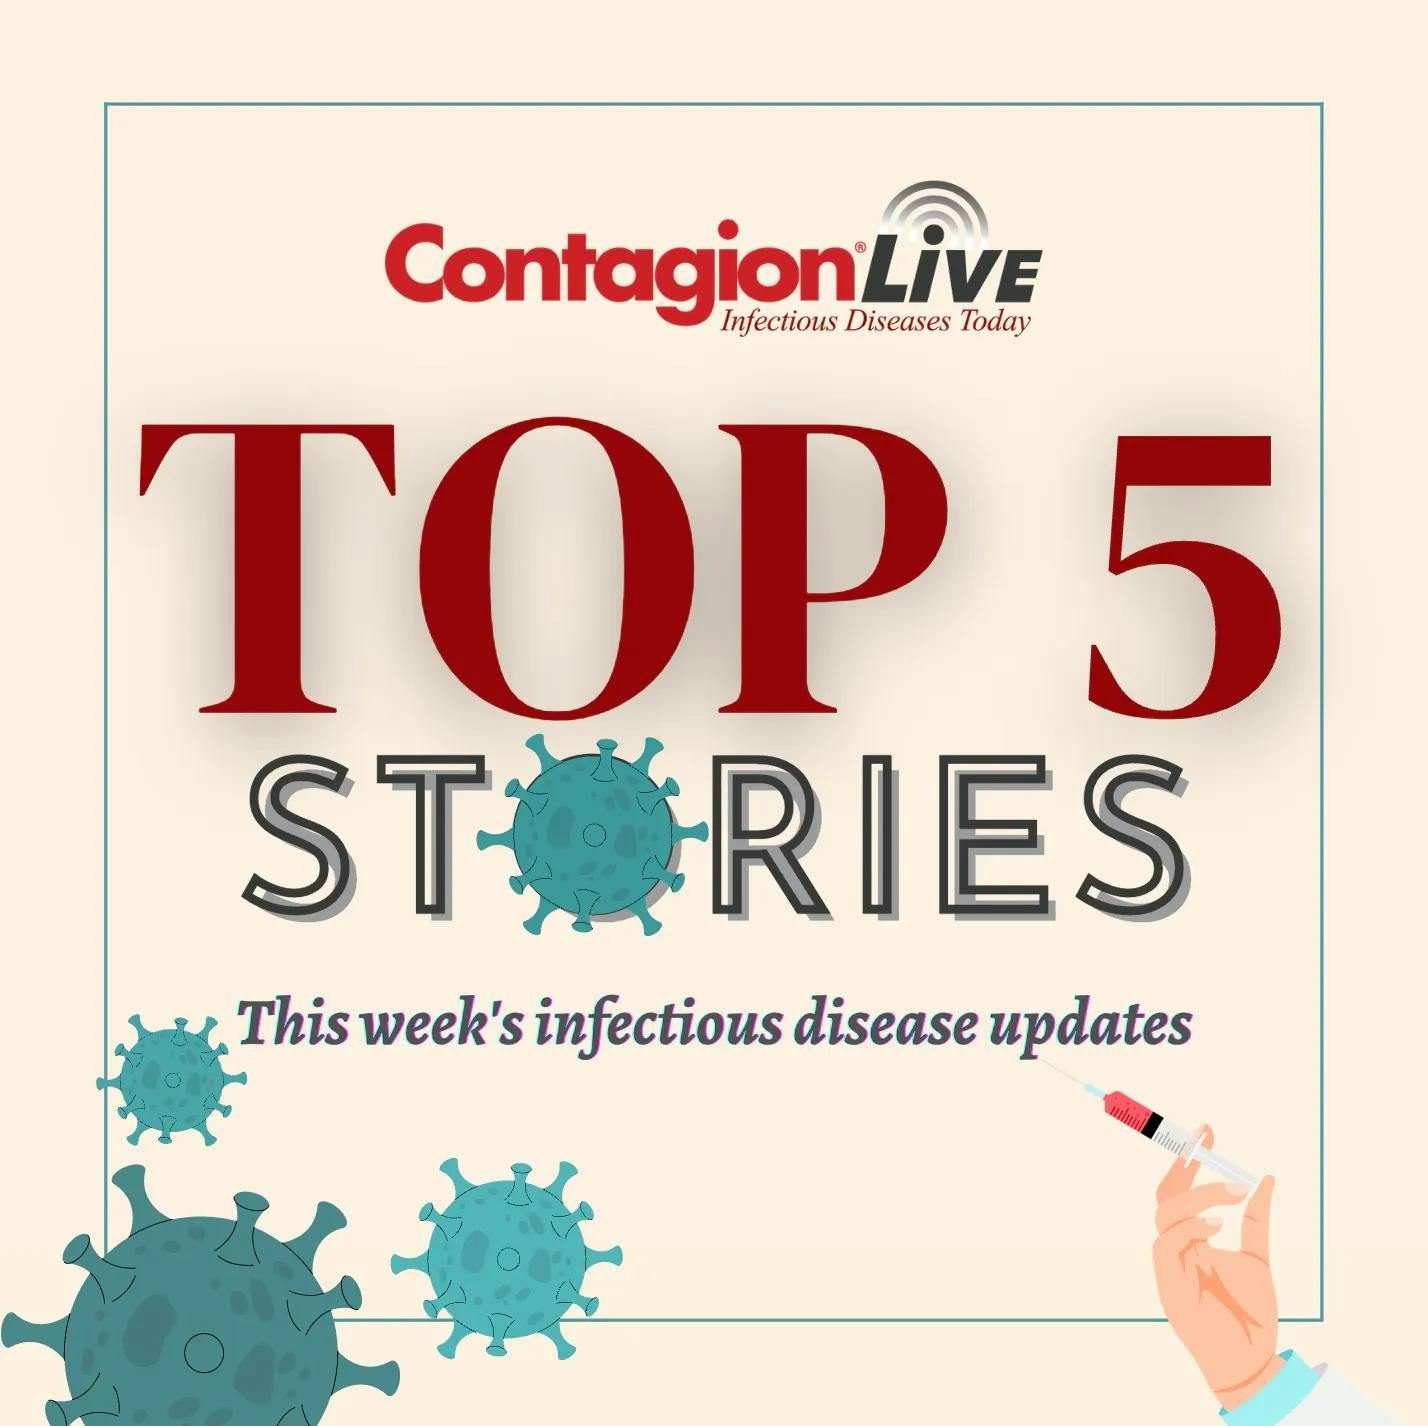 Top 5 Infectious Disease Stories Week of March 16